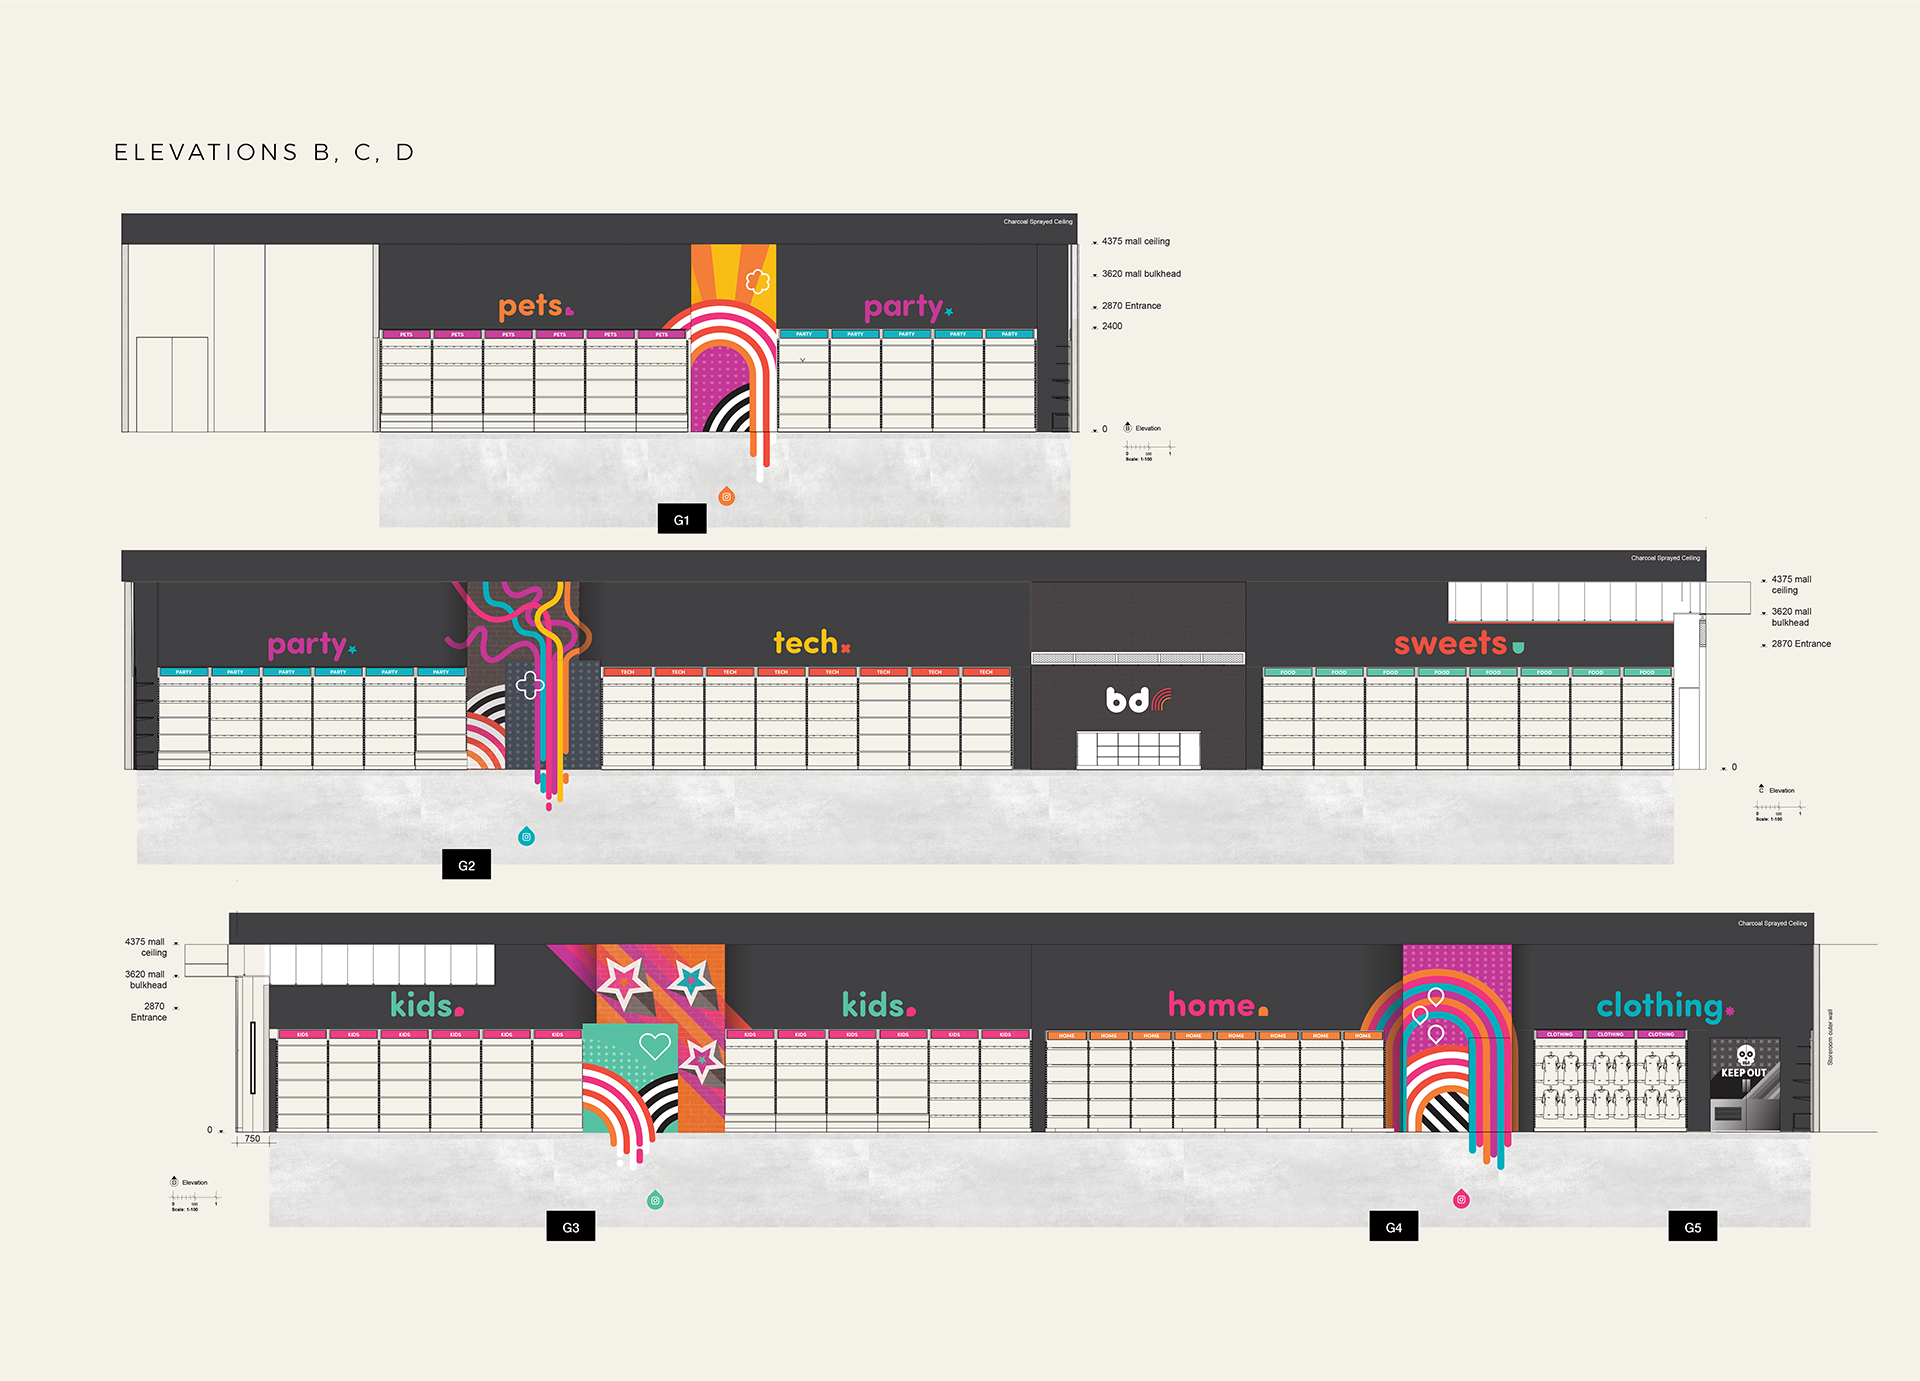 BDR - Graphic design applied to retail store elevations